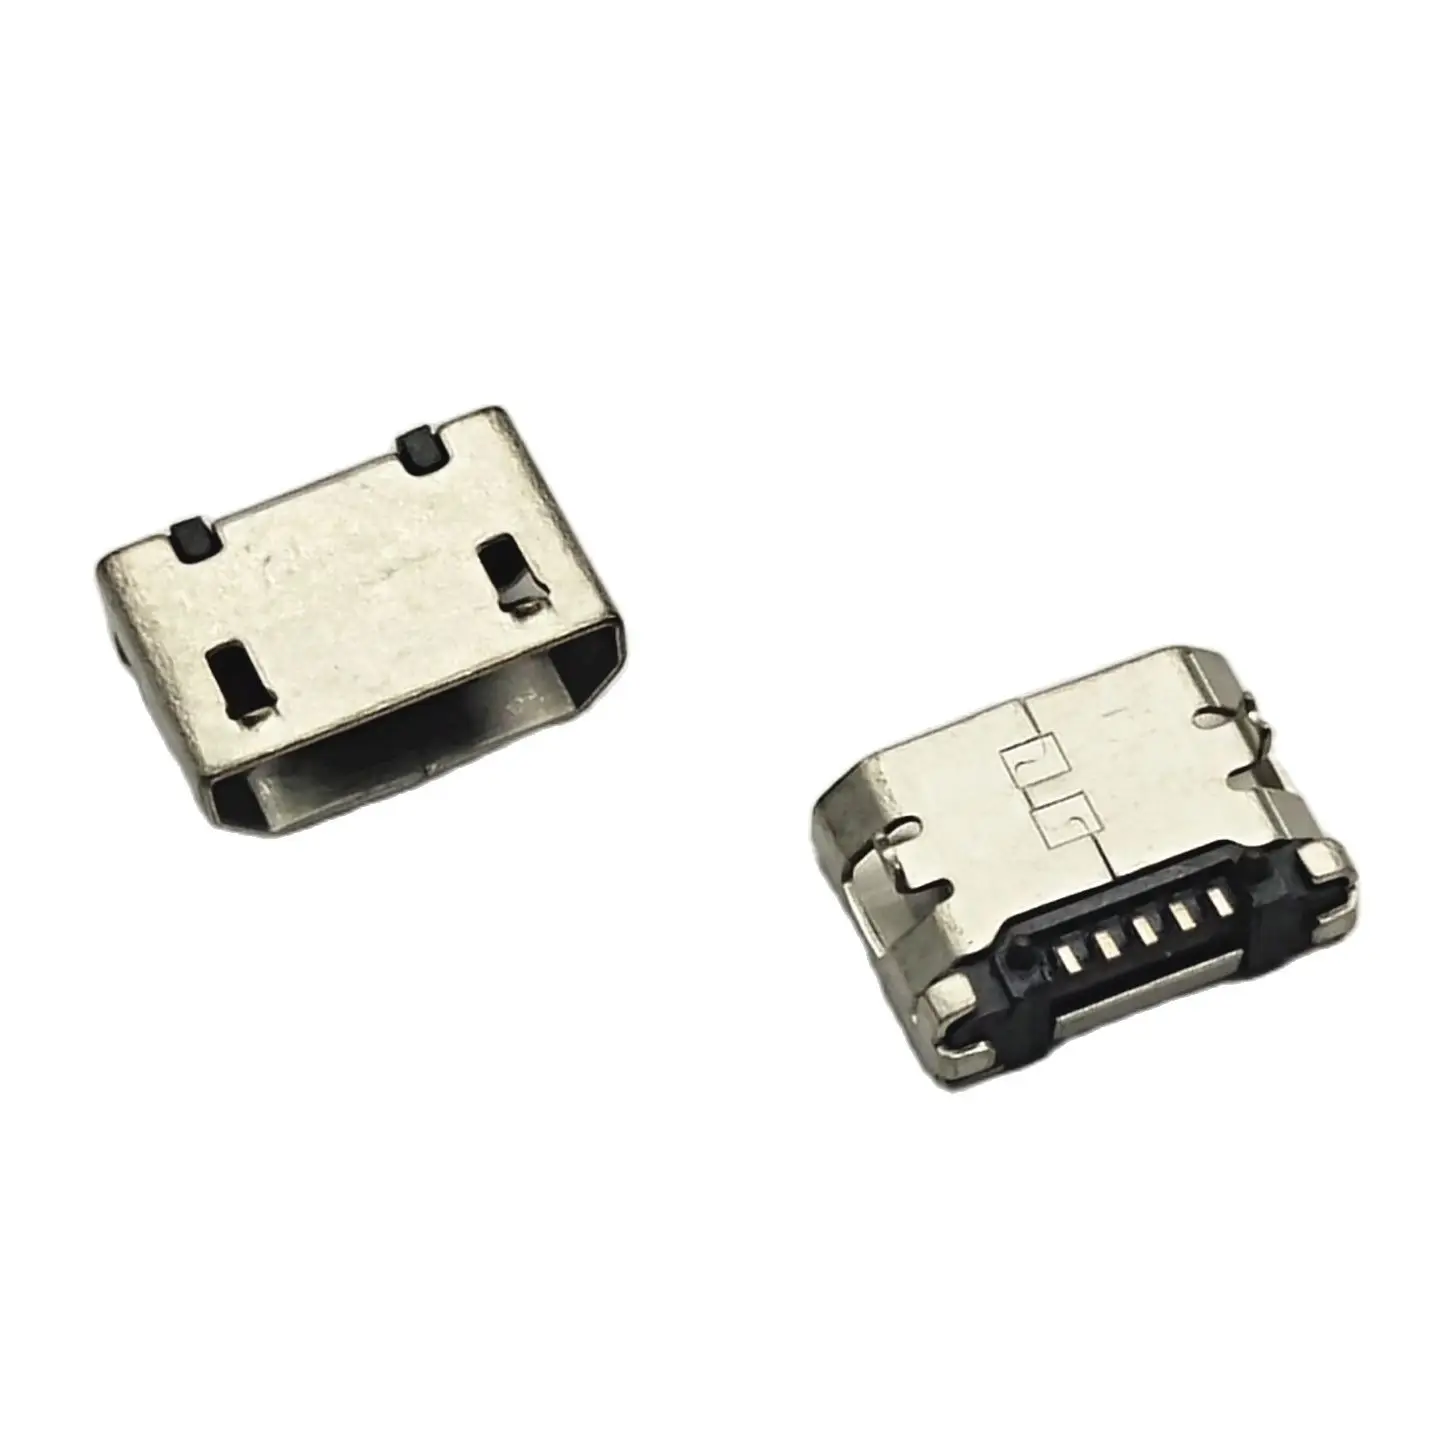 50pcs Micro USB connector 5pin 6.4mm No side Flat Mouth short pin DIP2 Data port Charging port connector for Mobile end plug